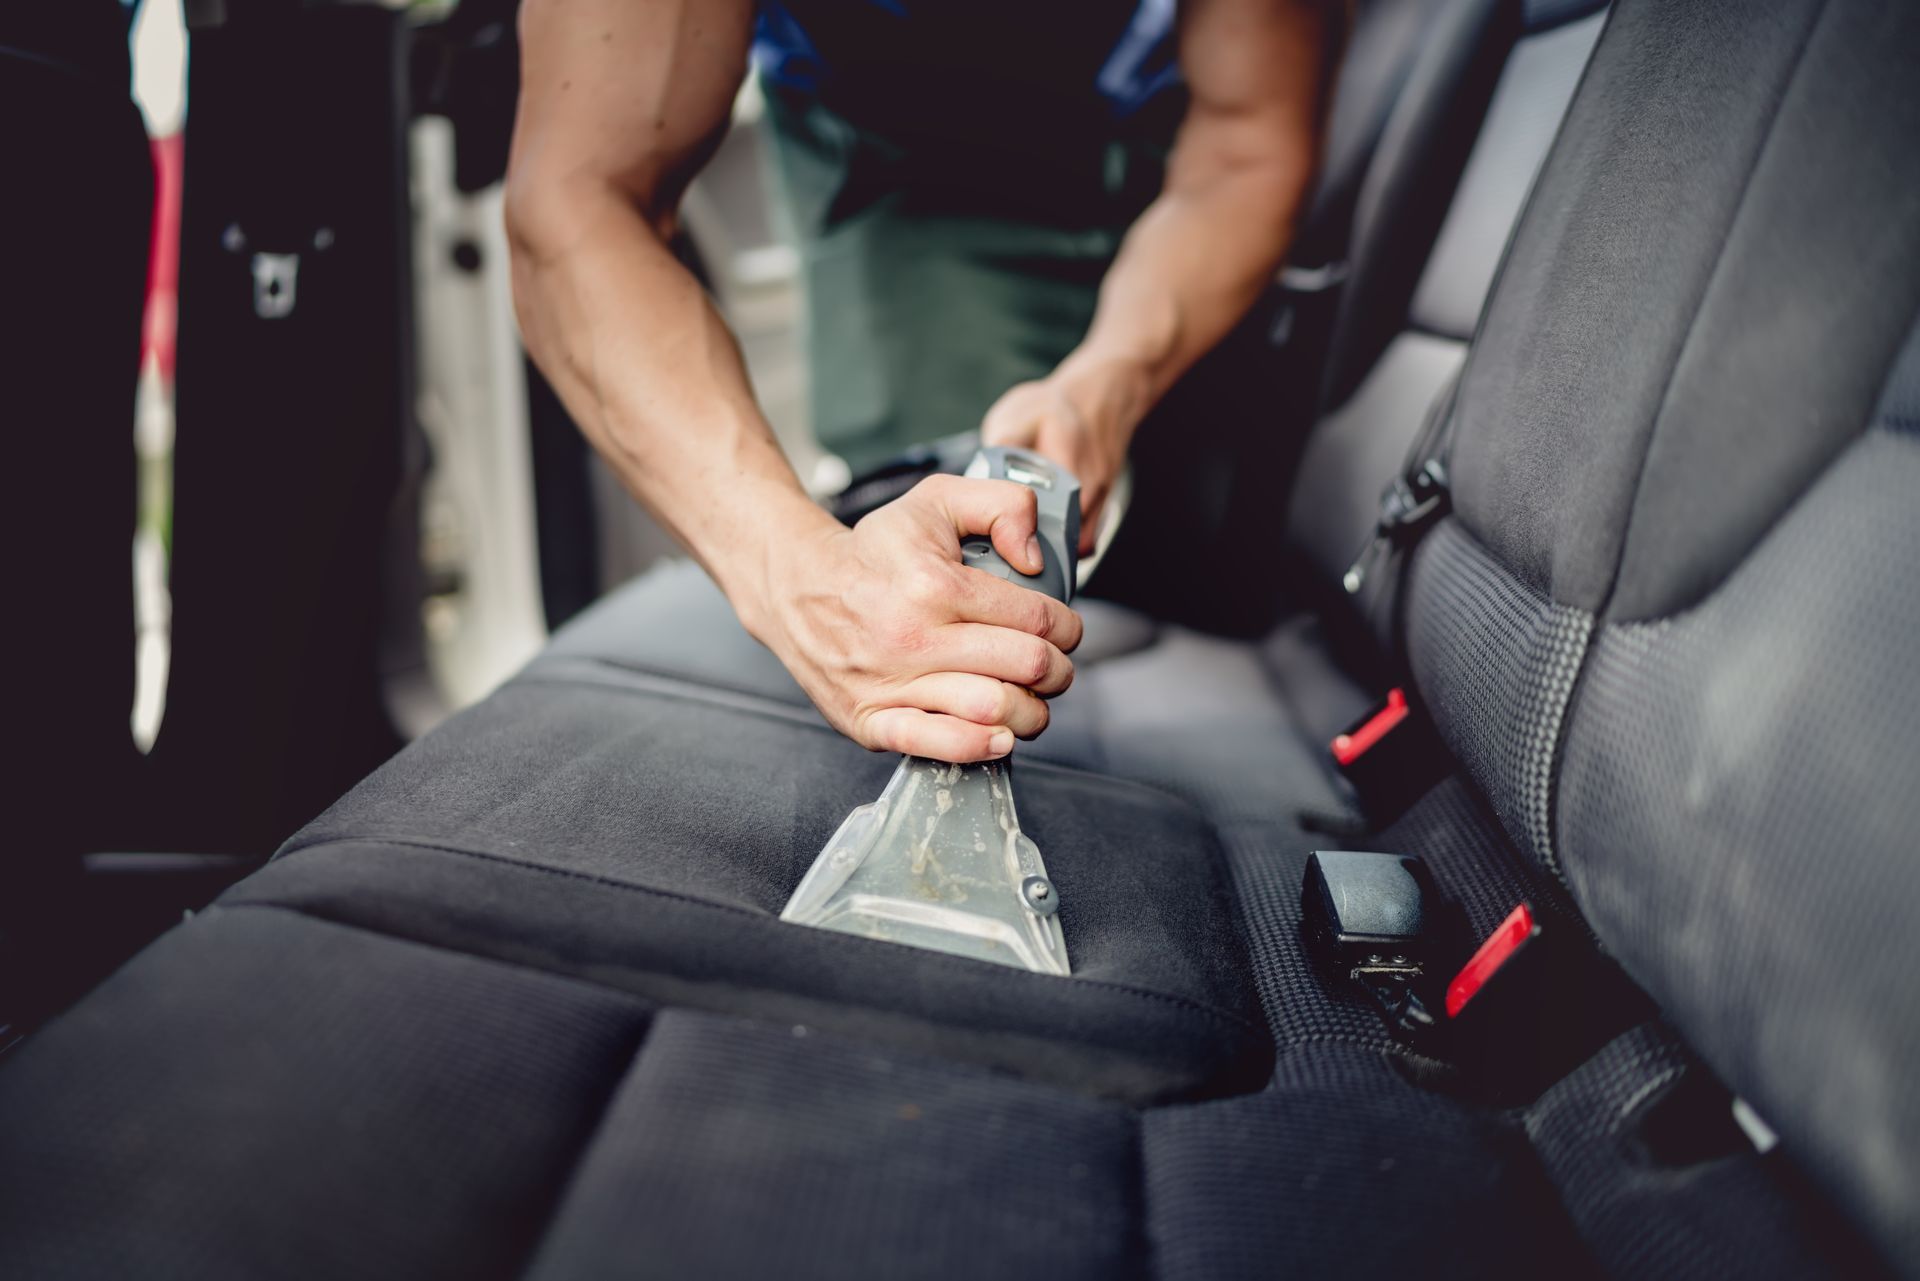 Person using a handheld vacuum cleaner to clean the interior of a car, removing dirt and debris from the seats.